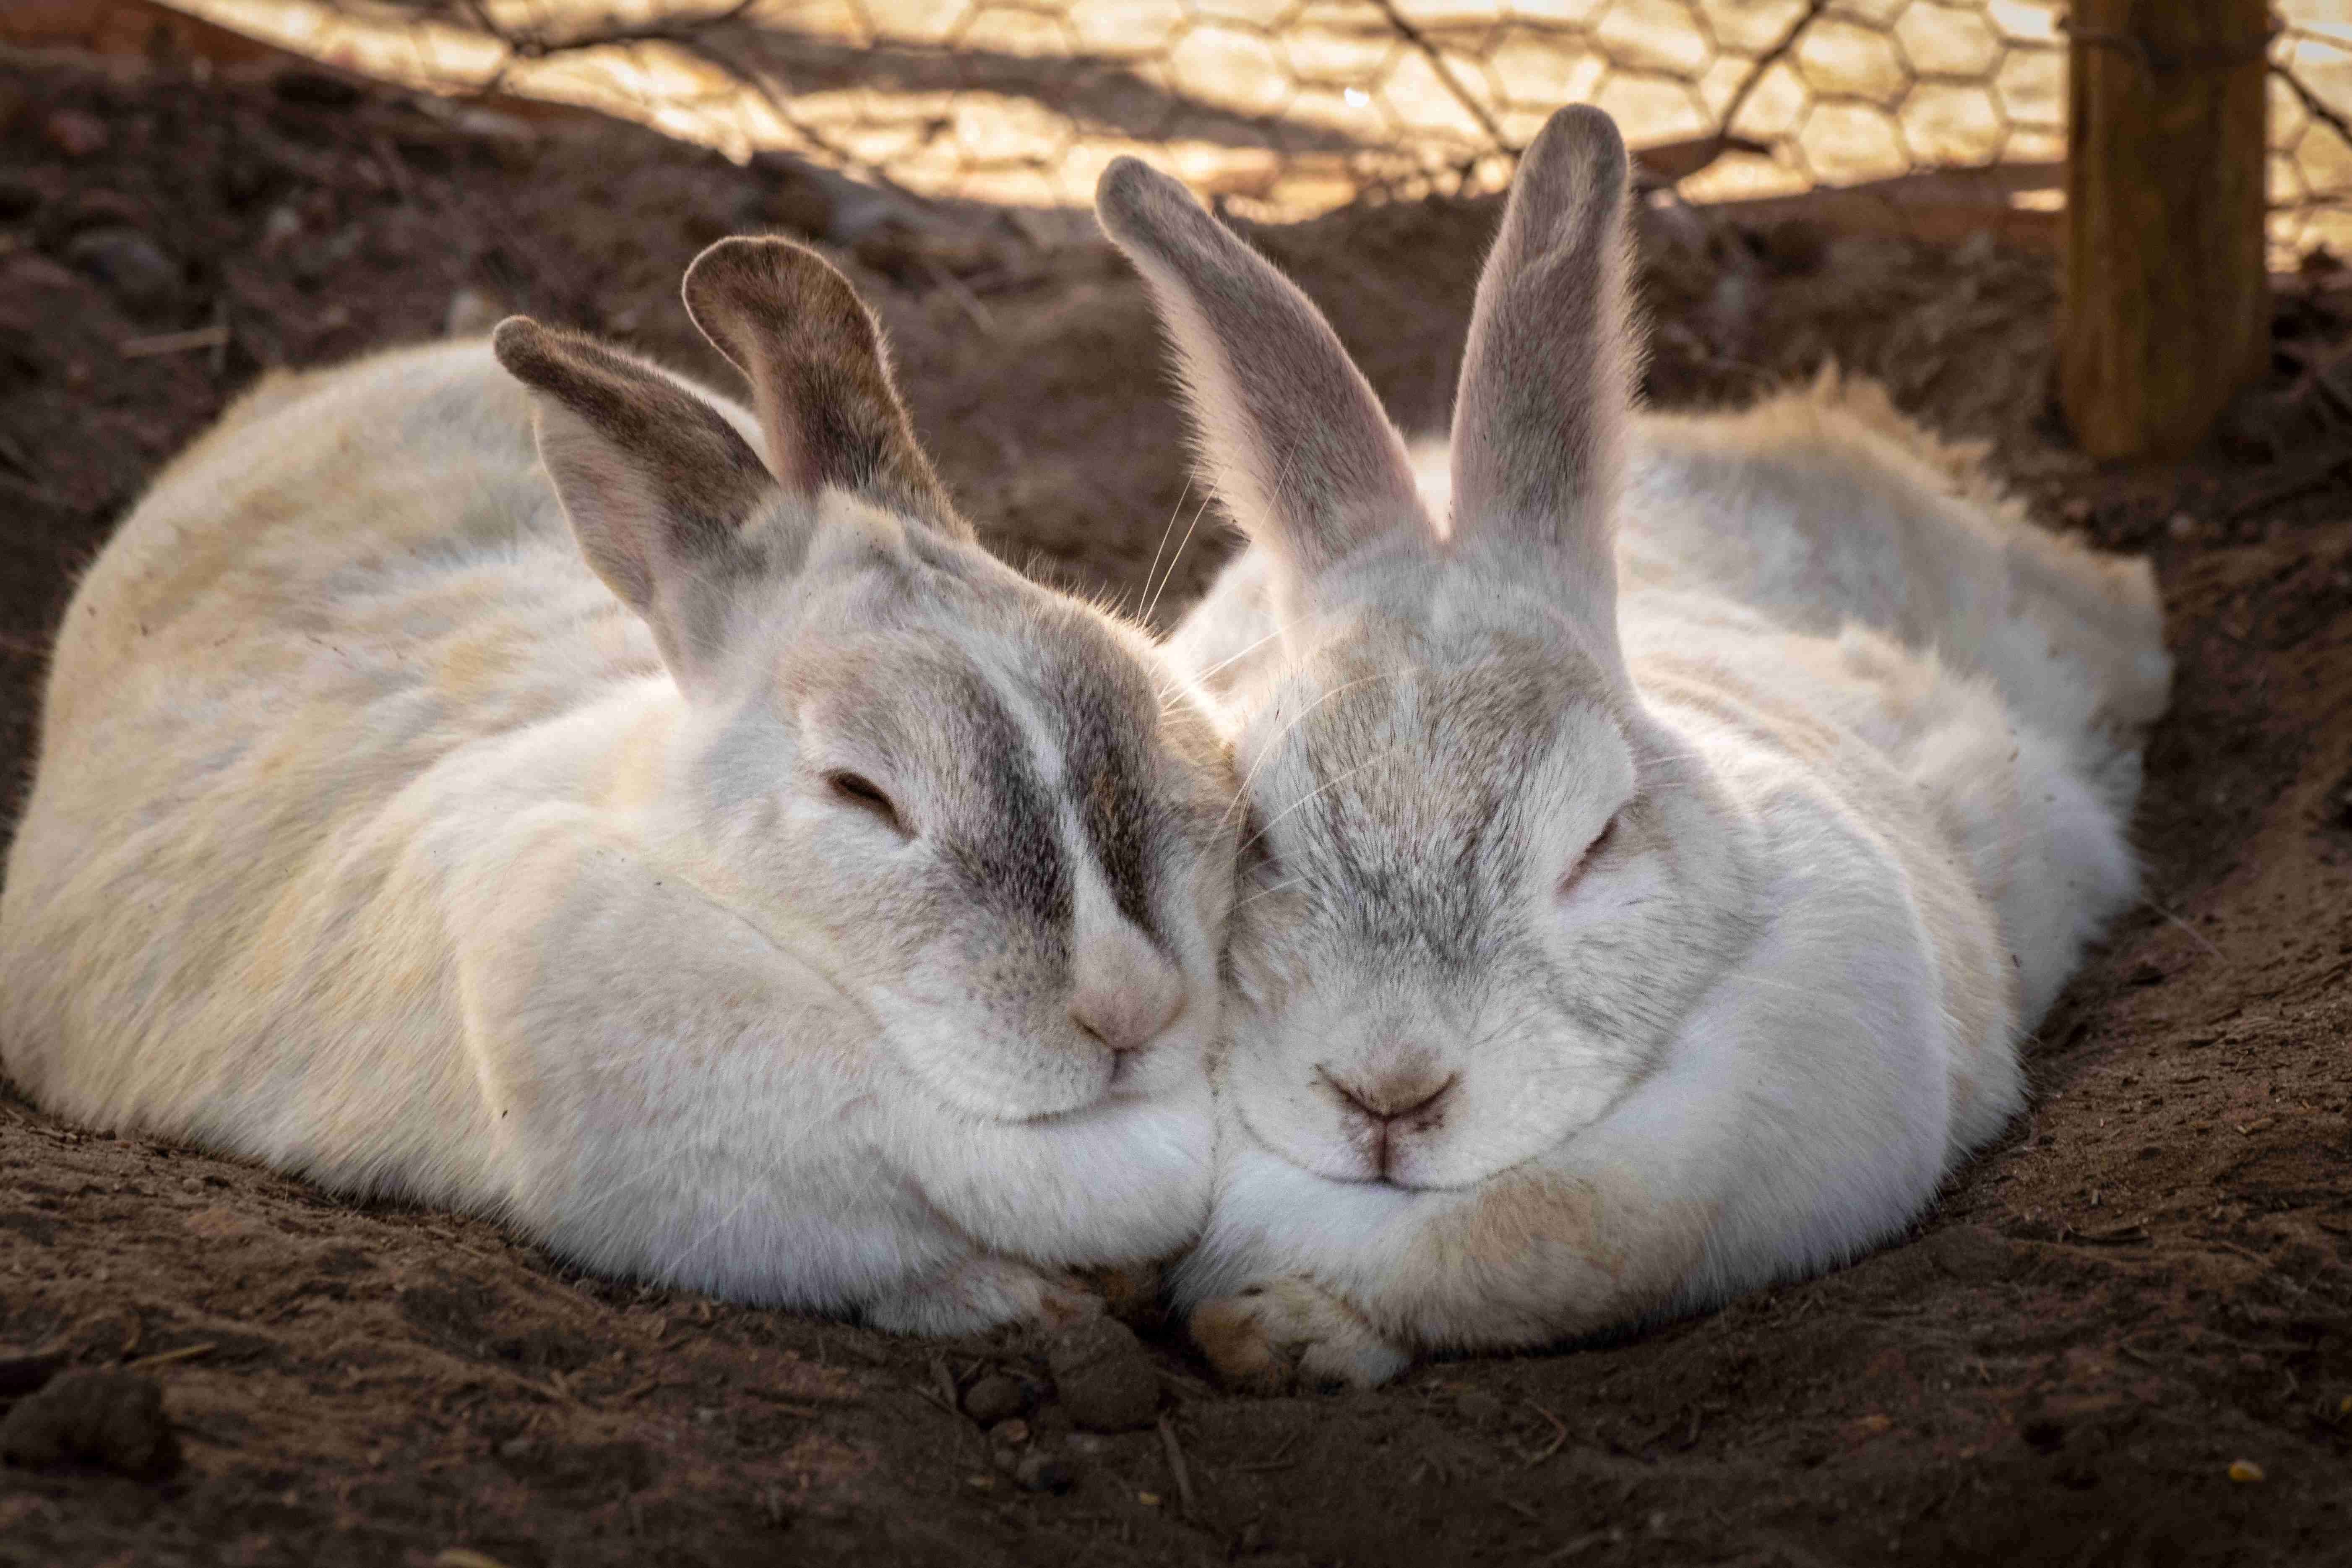 A Guide to Common Joint Problems in Rabbits: Symptoms, Treatment, and Prevention